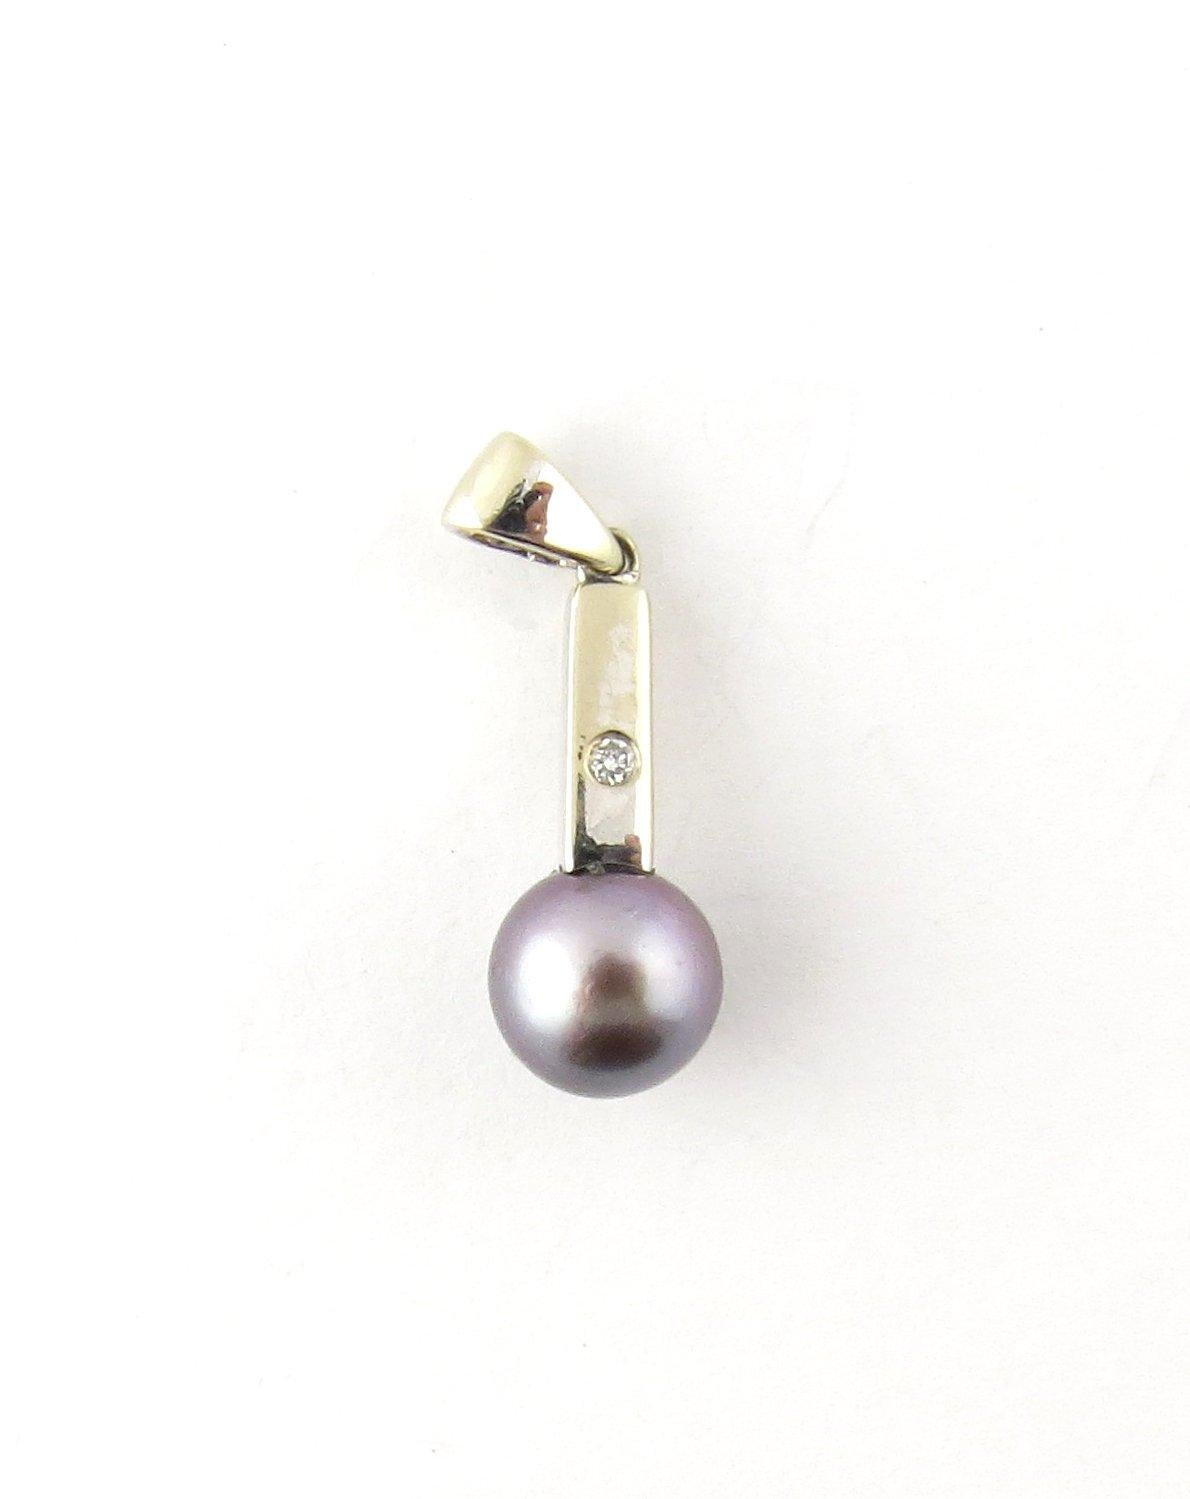 Vintage 19.2K White Gold Black Pearl and Diamond Pendant- 
This elegant pendant features one black cultured pearl (7.5 mm) accented with one round brilliant cut diamond and set in 19.2K white gold. 
Approximate total diamond weight: .01 ct. 
Diamond